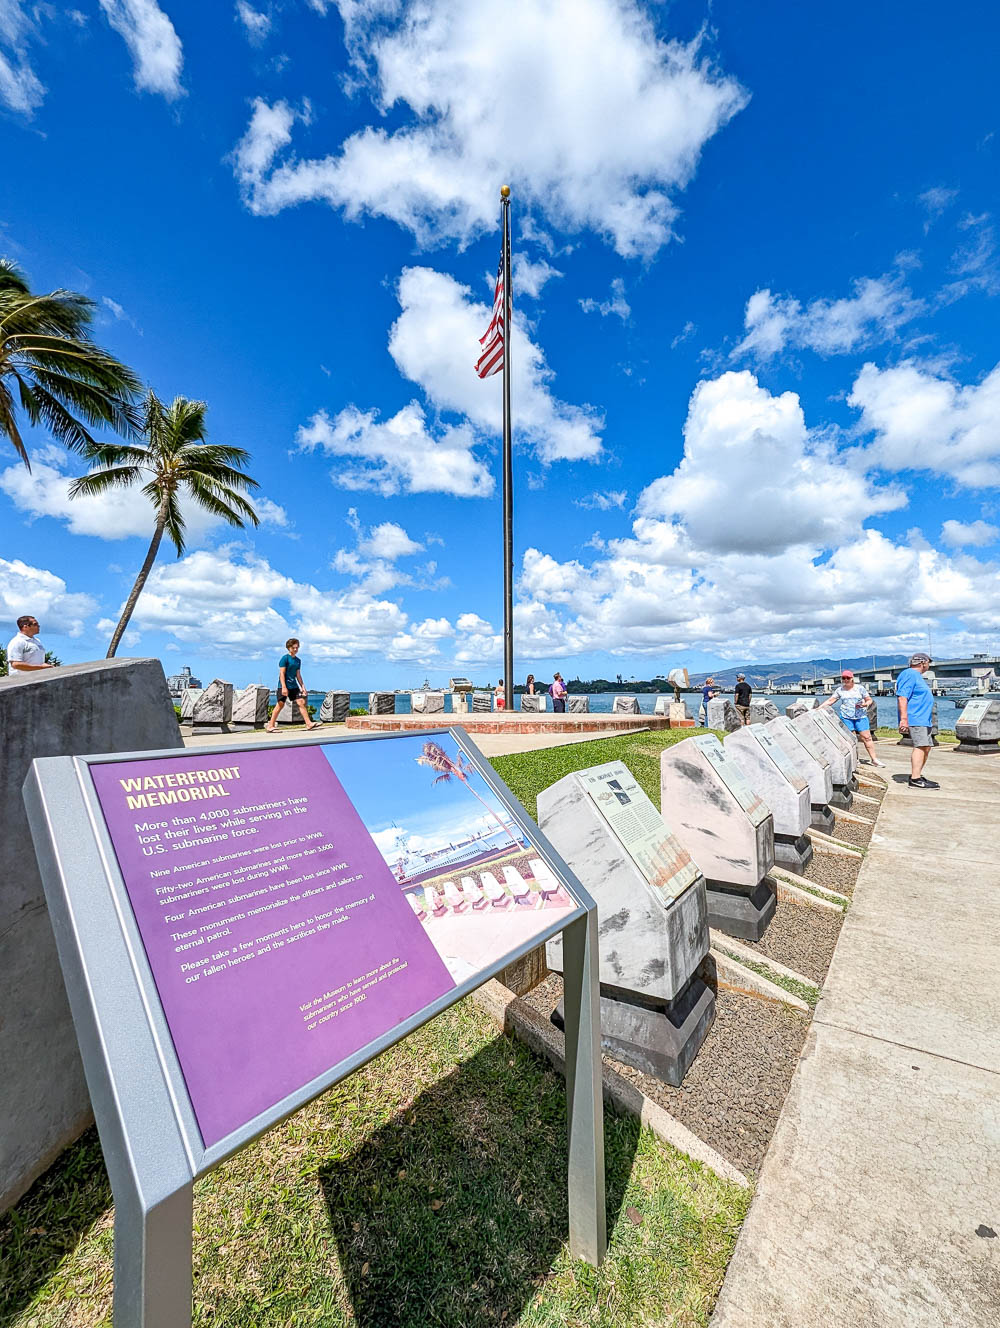 view of a waterfront memorial under a blue sky dotted with clouds